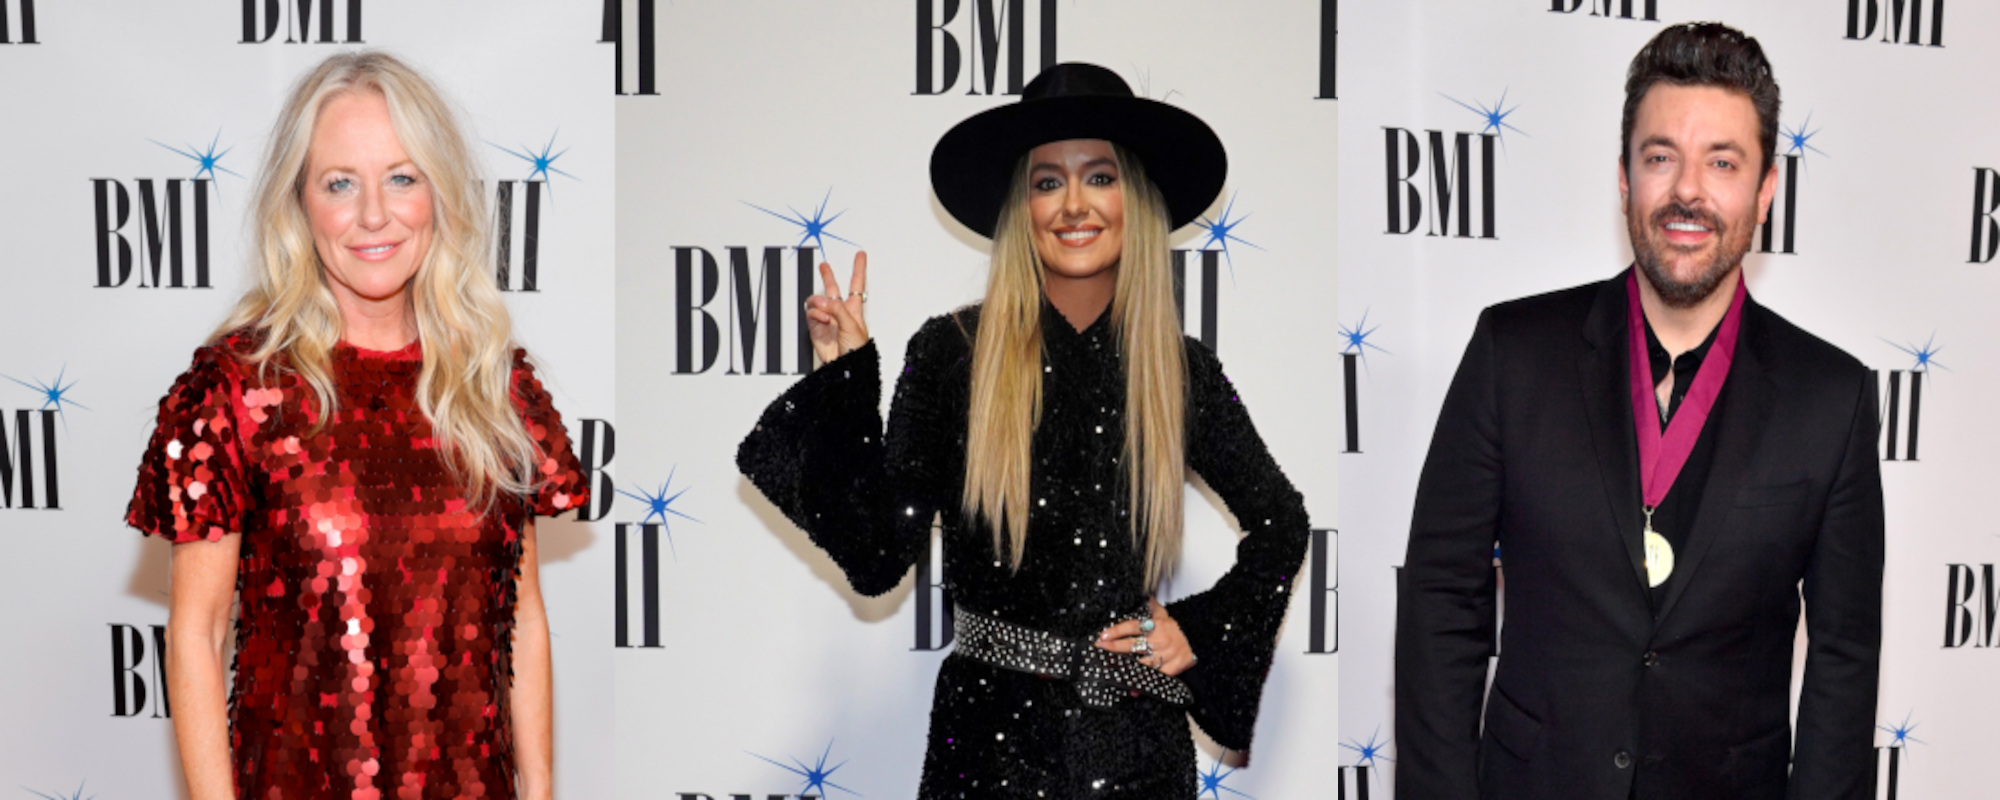 Red Carpet Ready—Songwriters Lainey Wilson, Luke Combs, Chris Young, and More Show off Red Carpet Looks at BMI Awards: See Photos